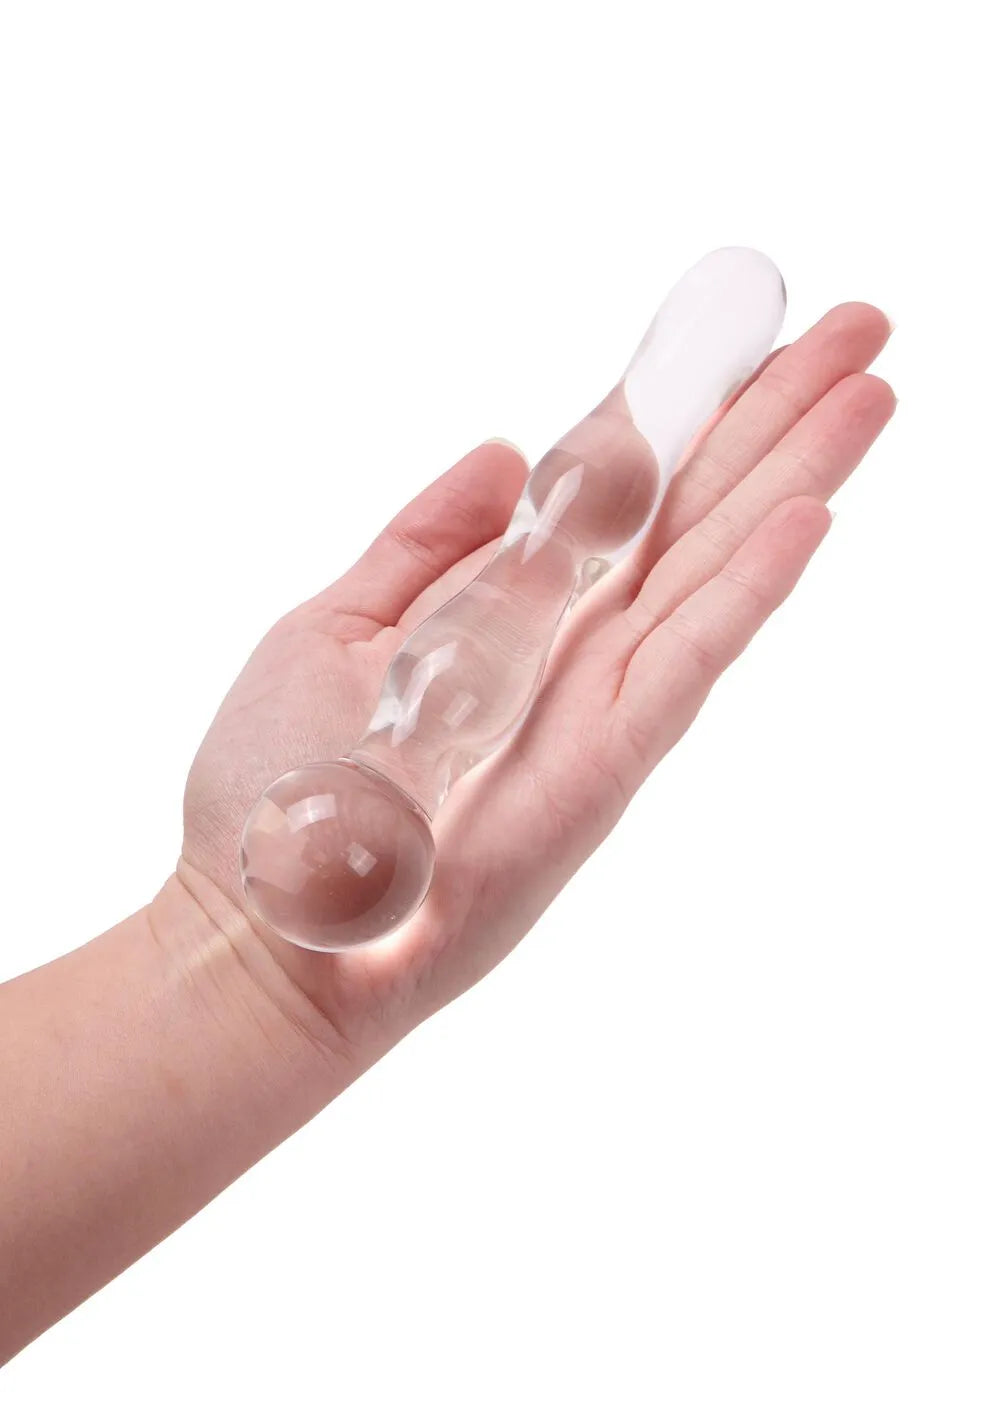 5 Inch Glass Rippled Dildo From Ann Summers, Image 1